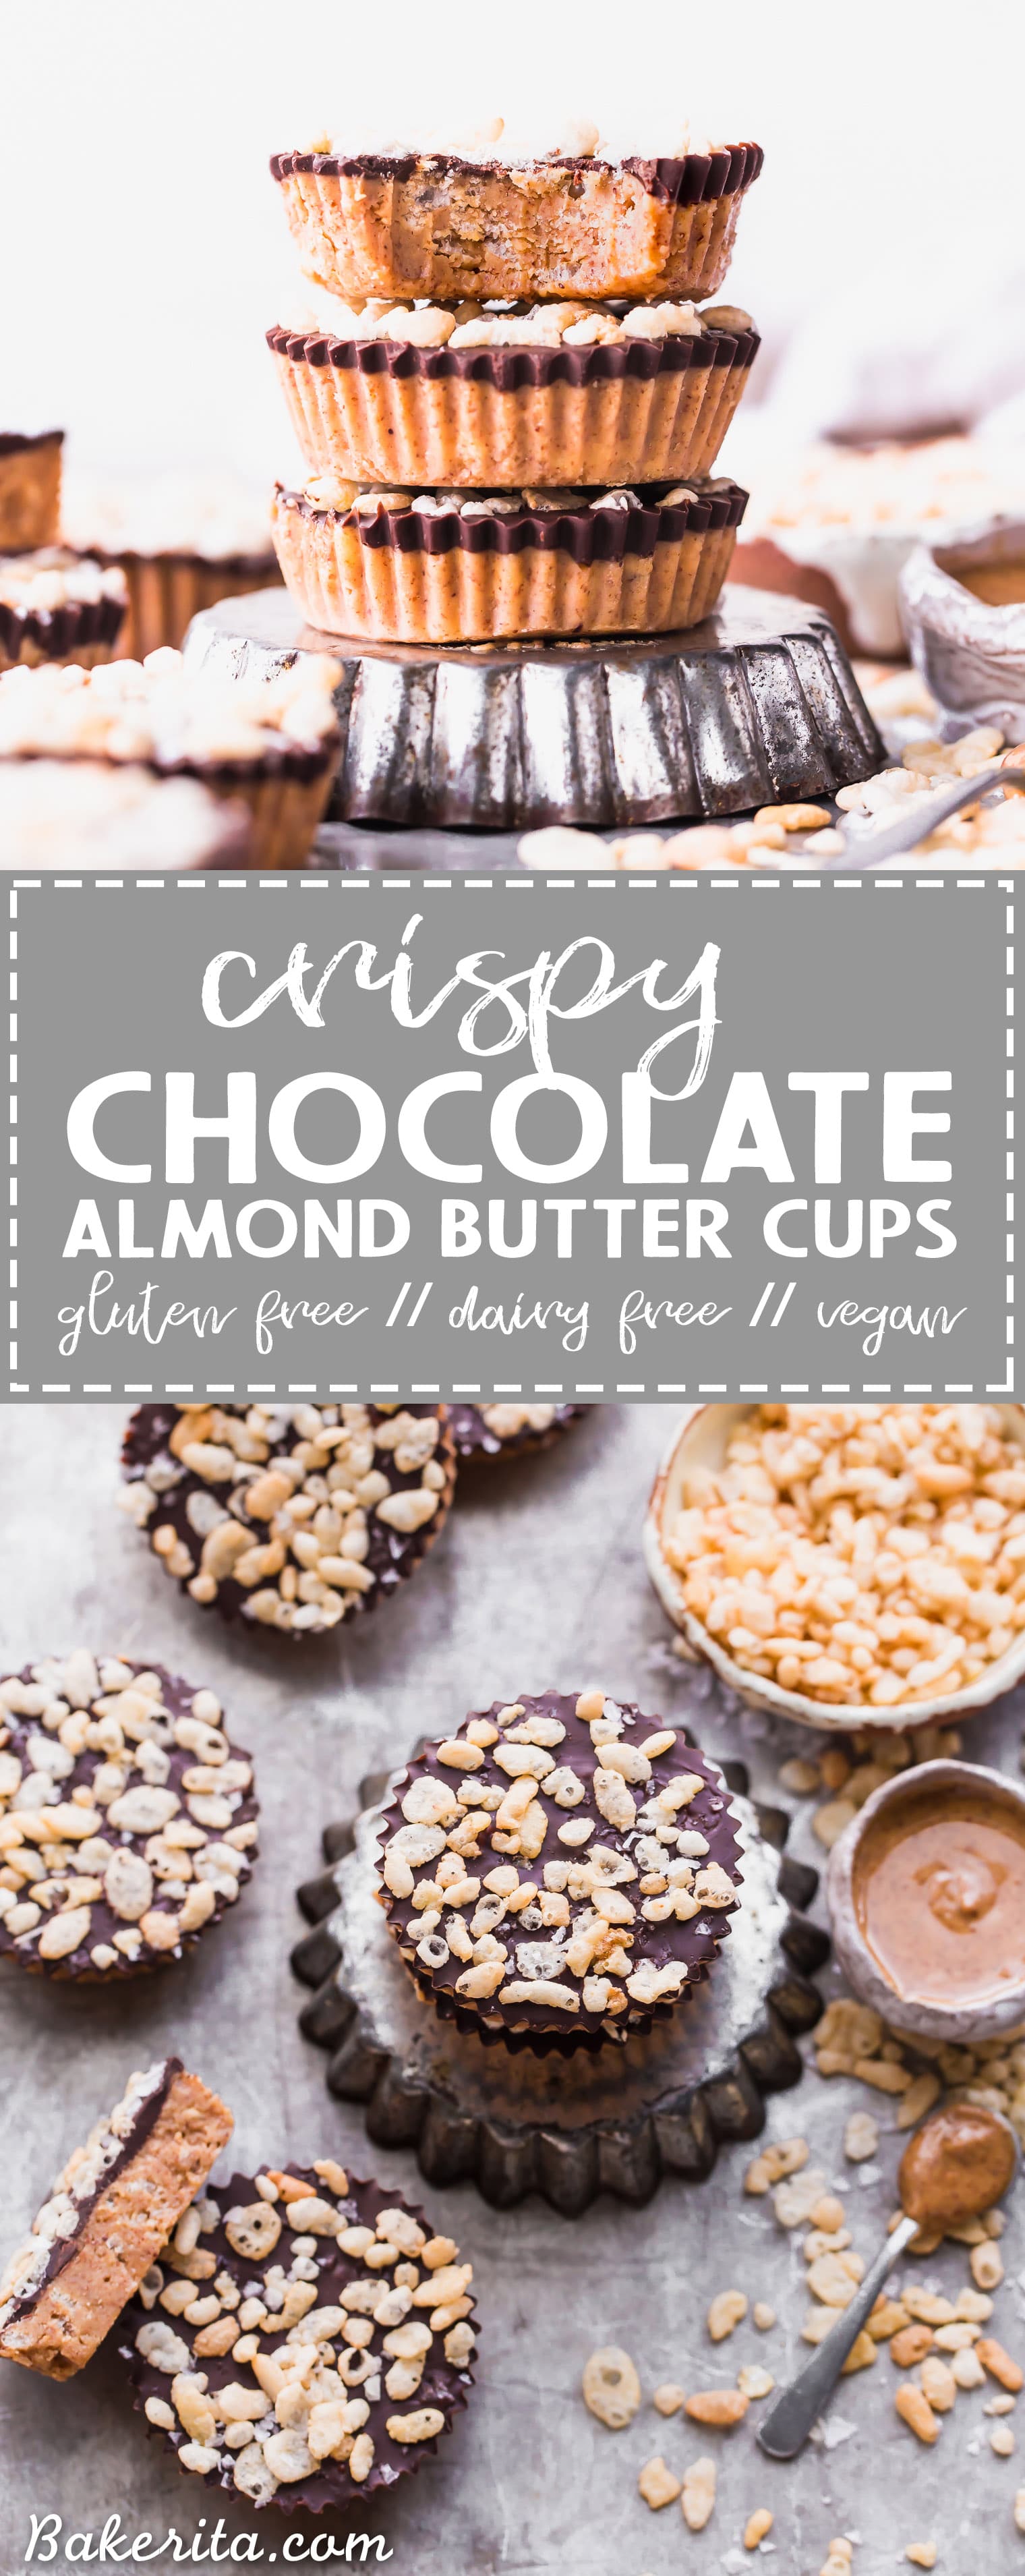 These No-Bake Crispy Chocolate Almond Butter Cups are rich, decadent, and so delicious, with a crispy almond butter layer topped with dark chocolate. The crisp comes from crispy brown rice cereal! You'd never guess these almond butter cups were gluten-free, refined sugar-free, and vegan. 